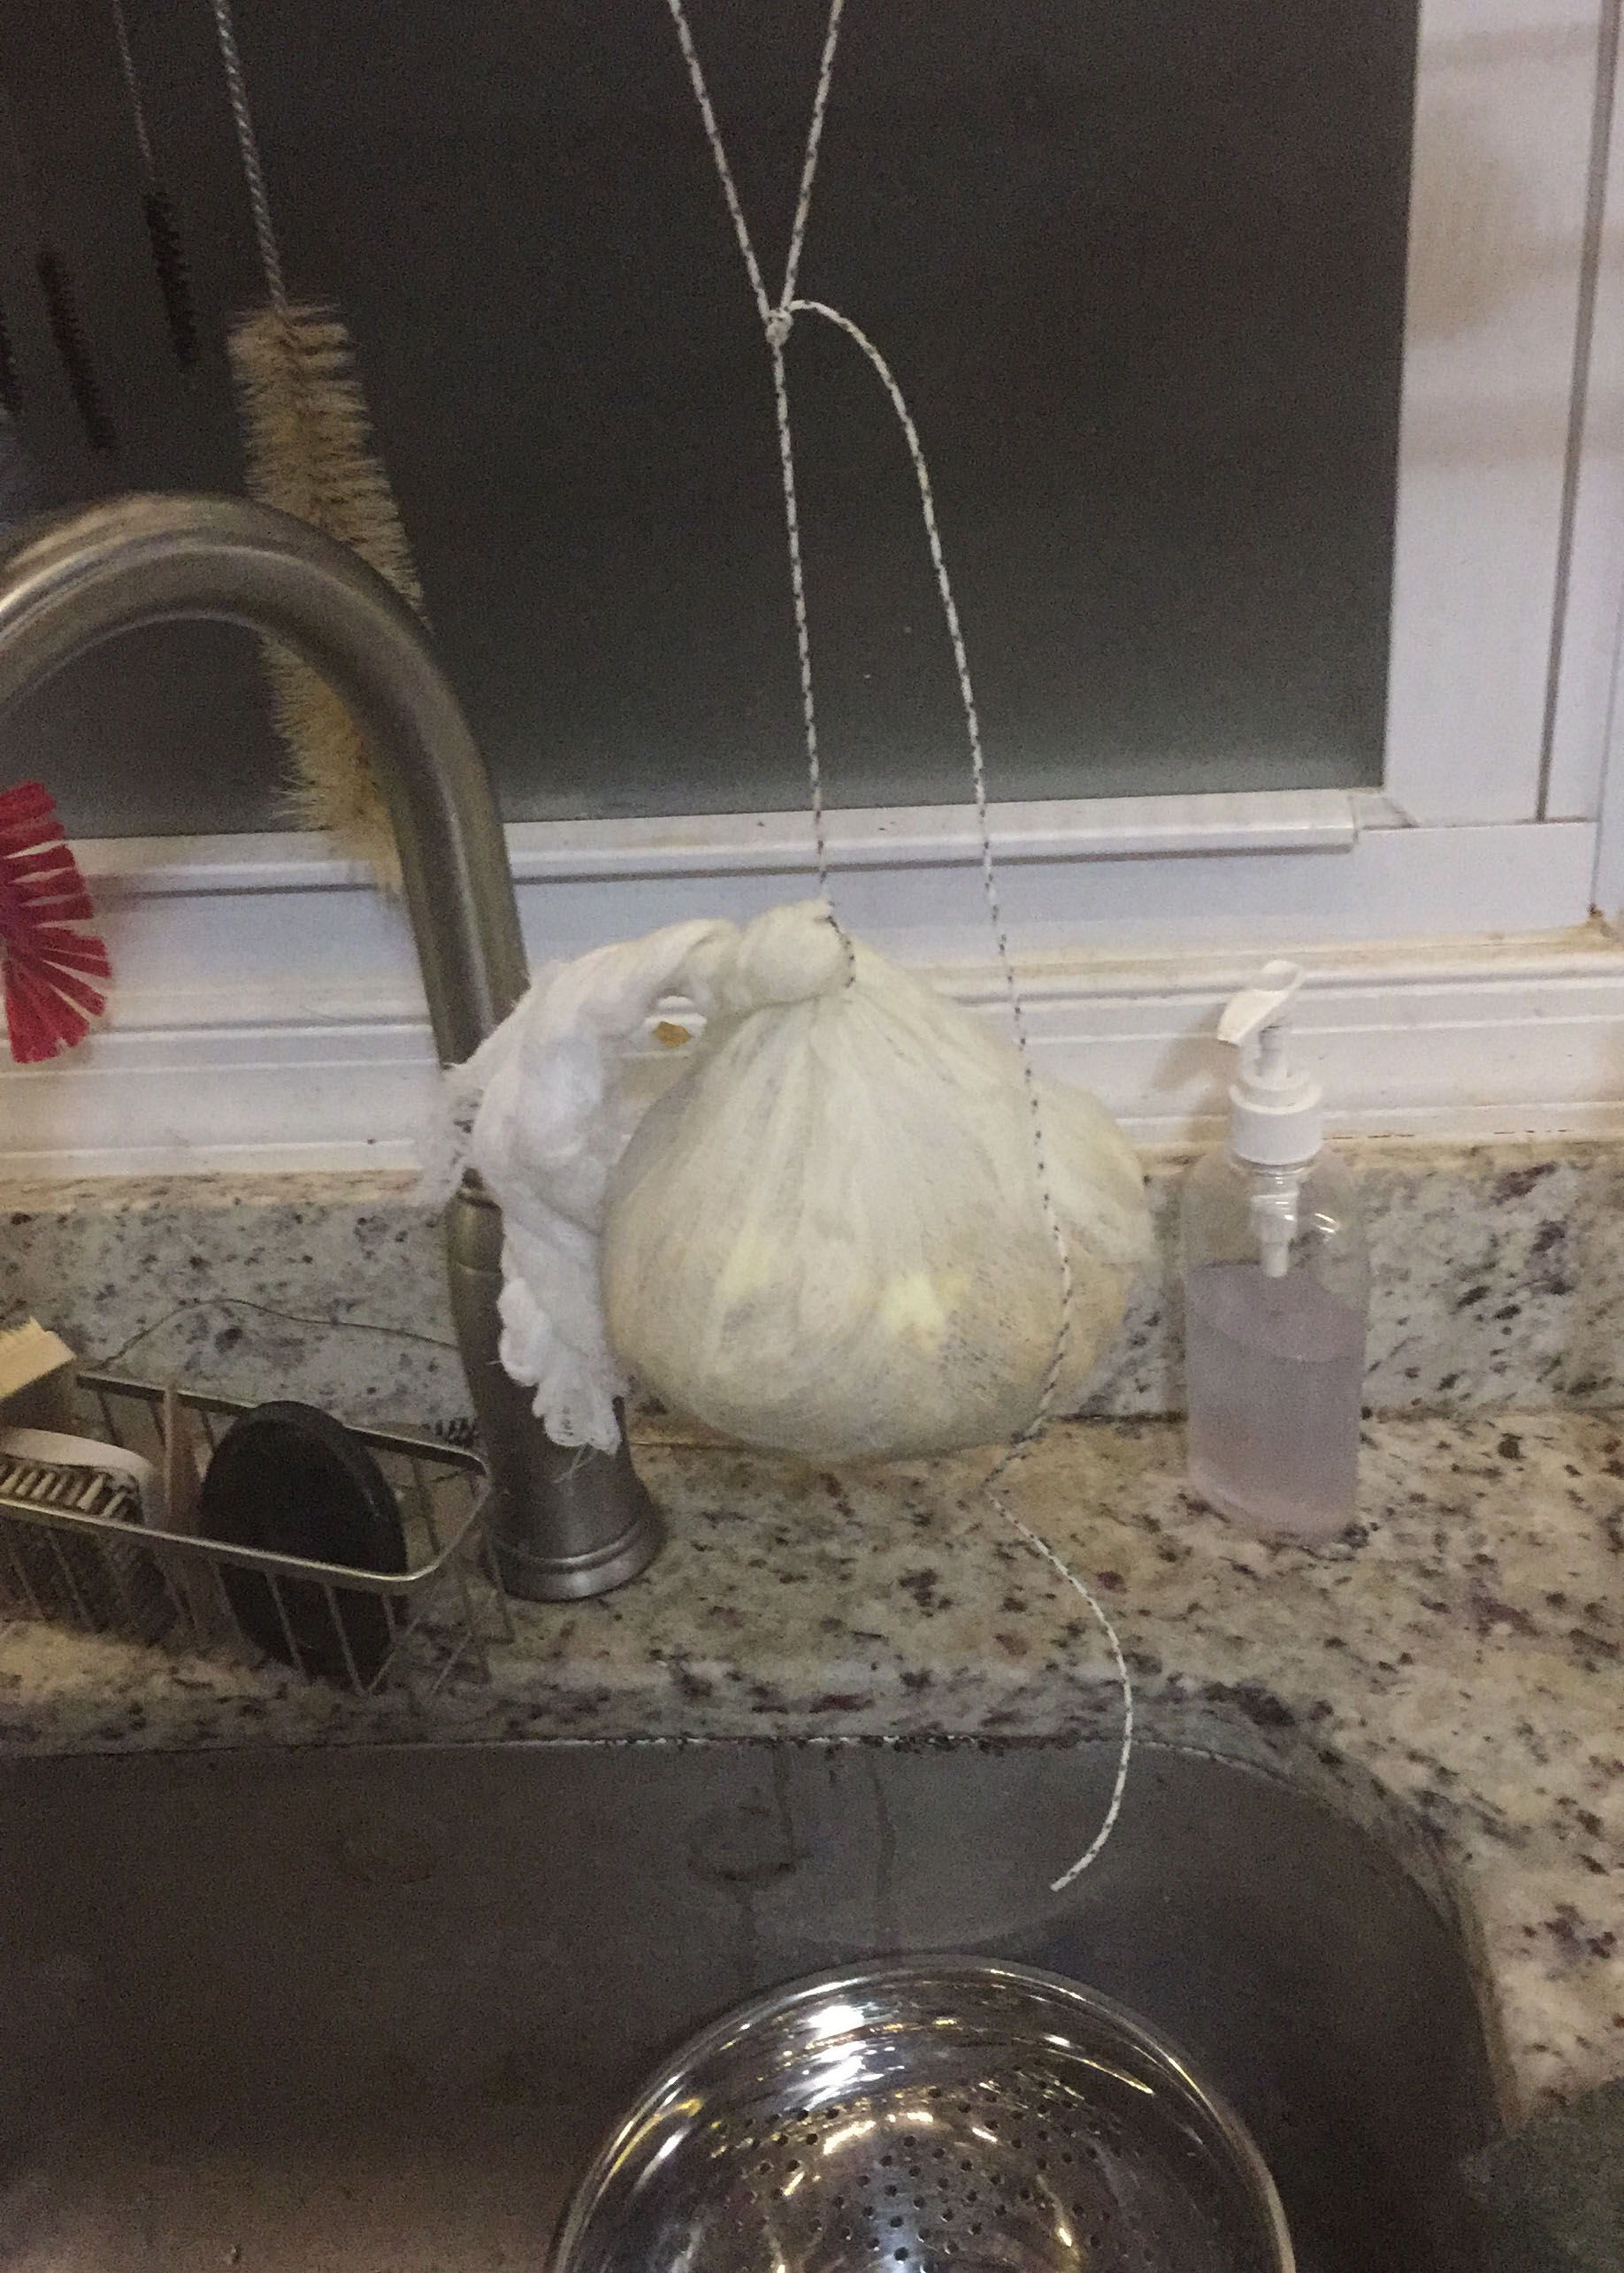 a cheesecloth-wrapped ball hanging over the sink